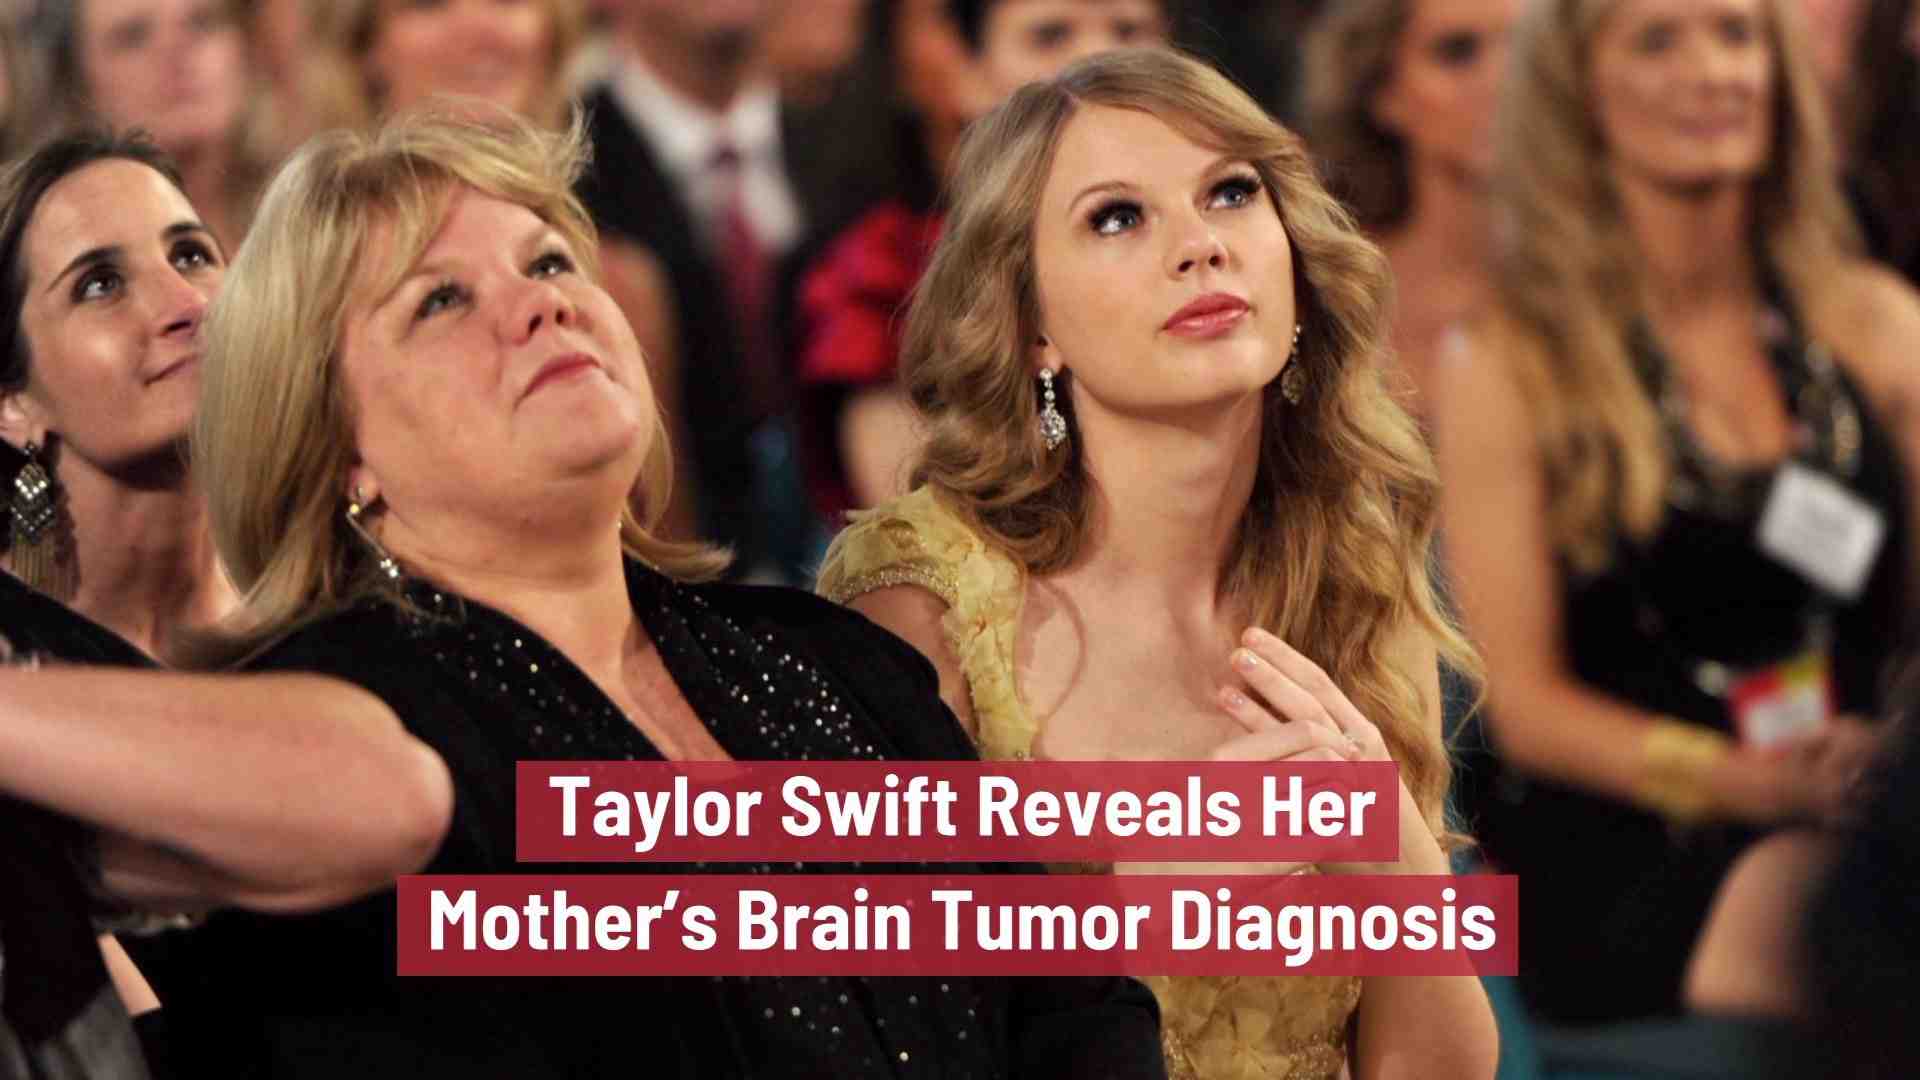 What cancer did Taylor Swift's dad have?